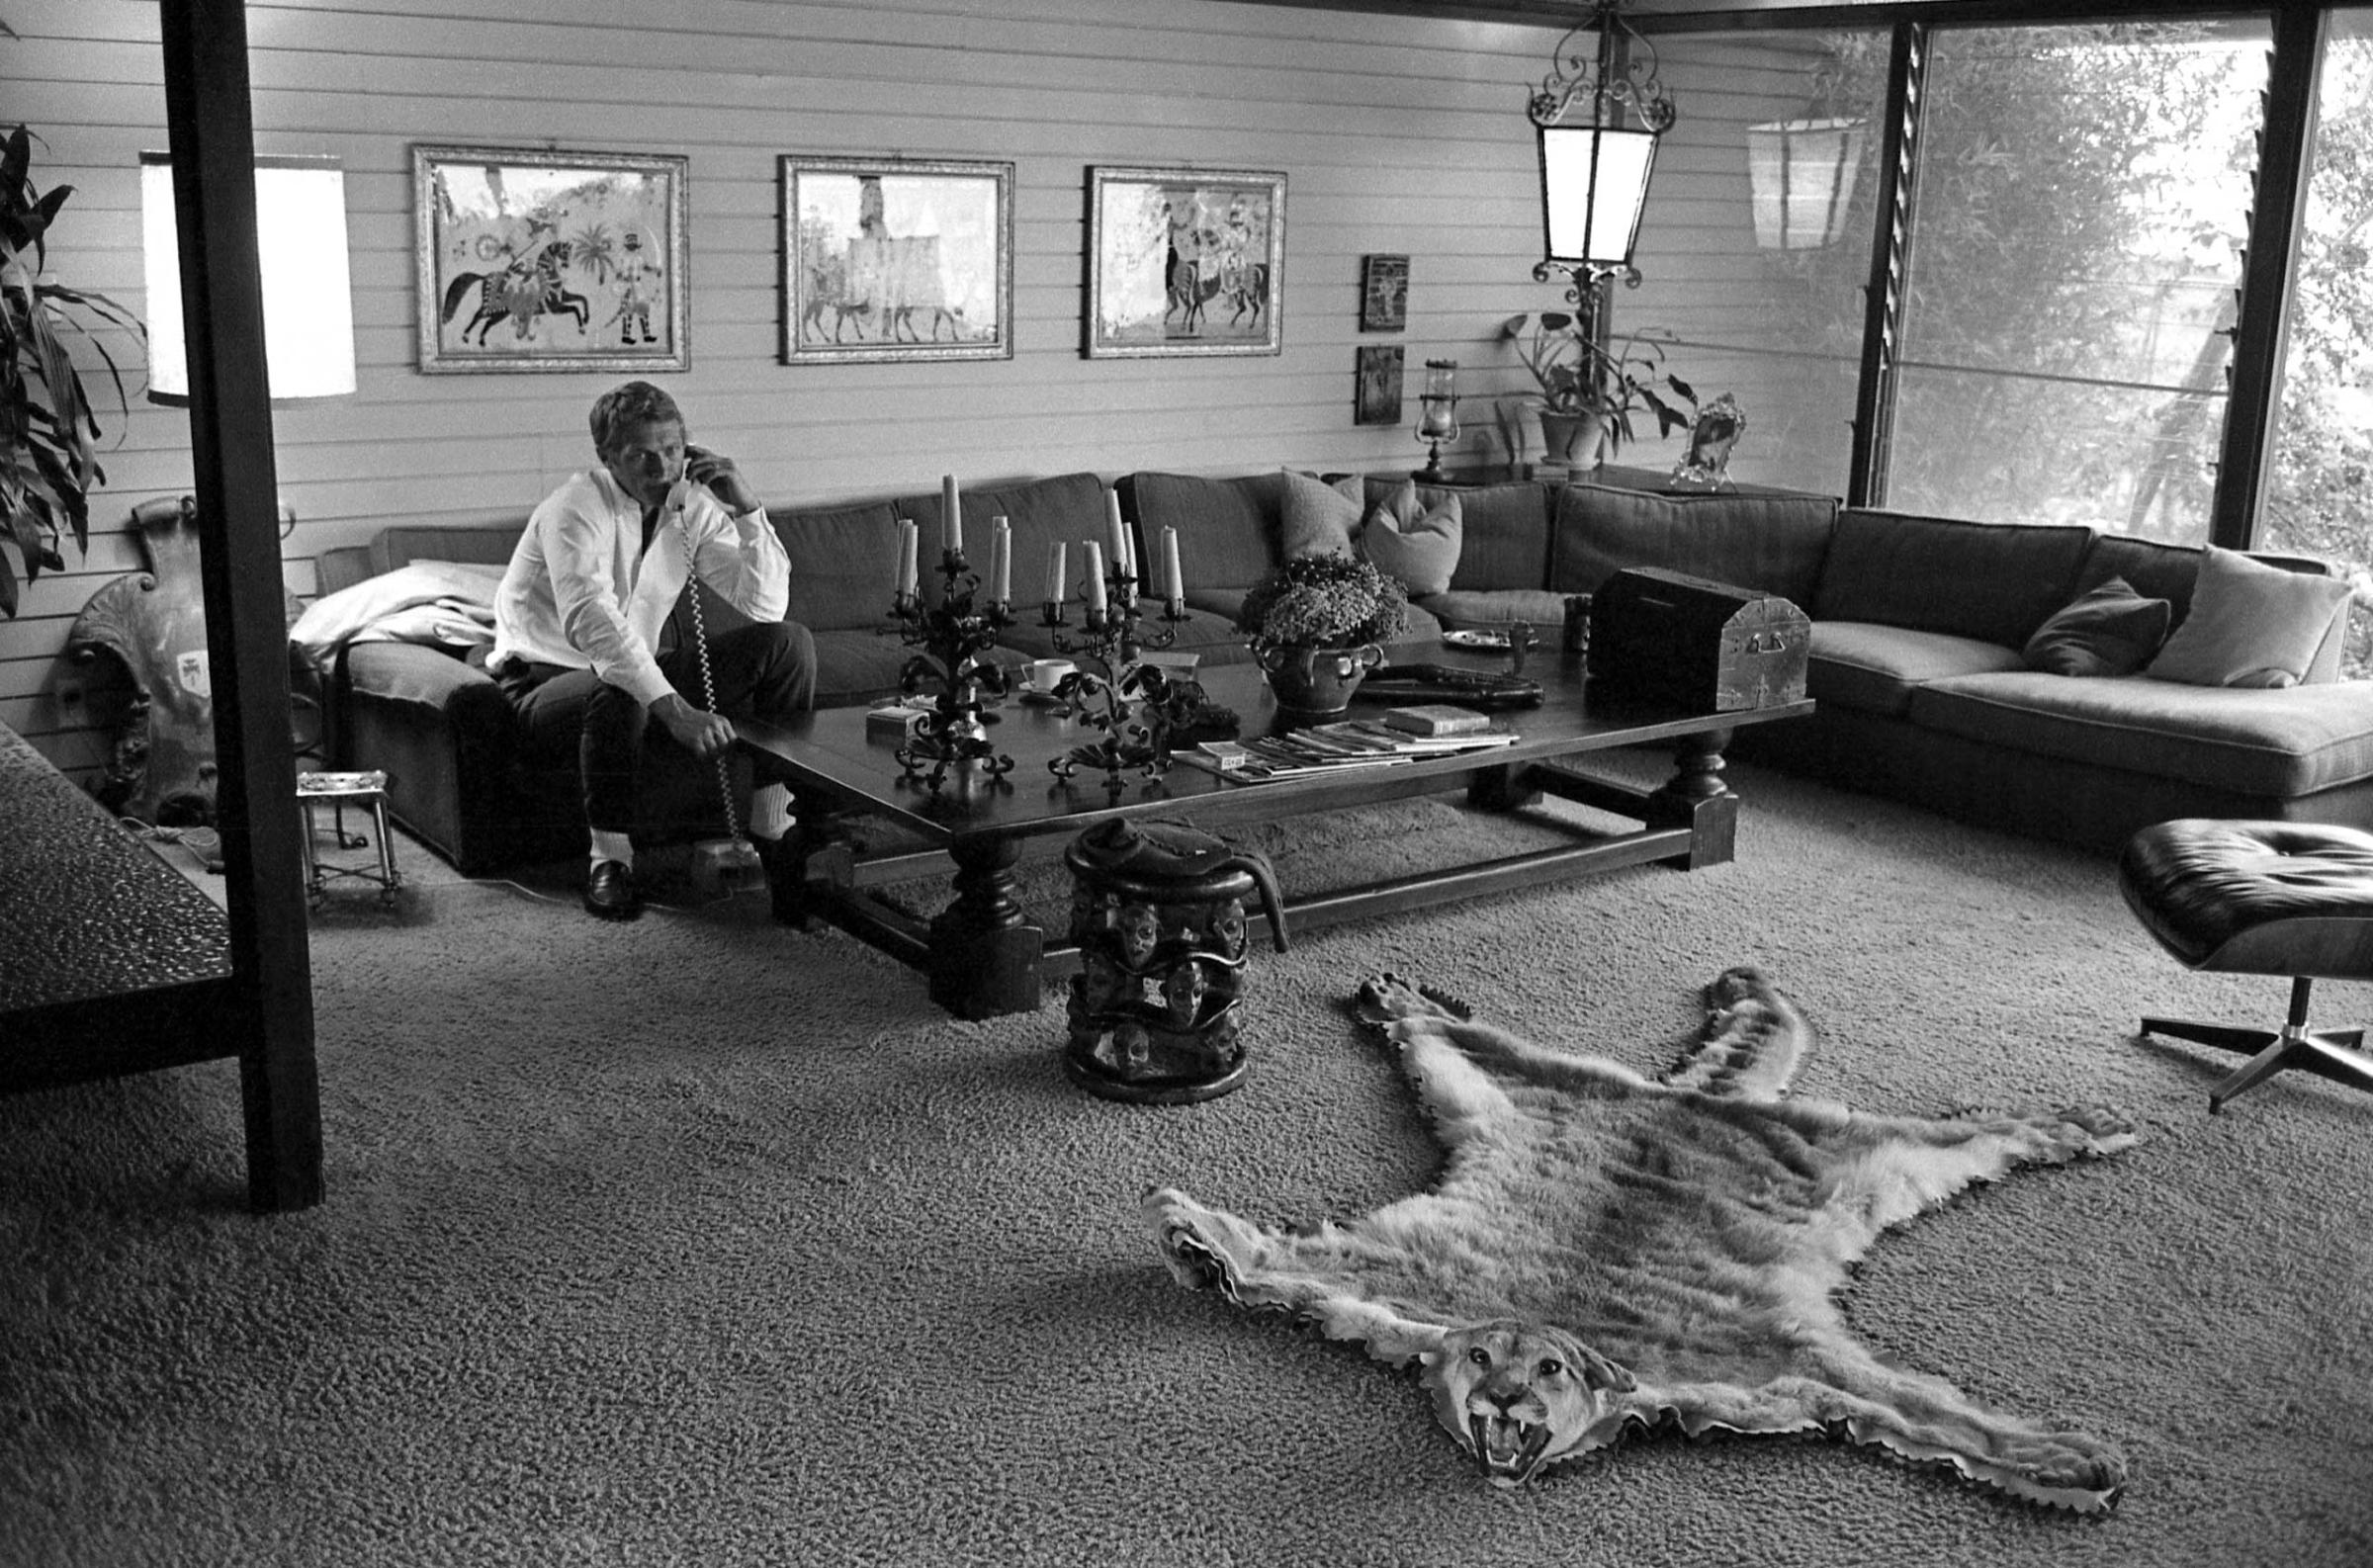 McQueen takes a call in the living room of his eclectic home in Hollywood, 1963.